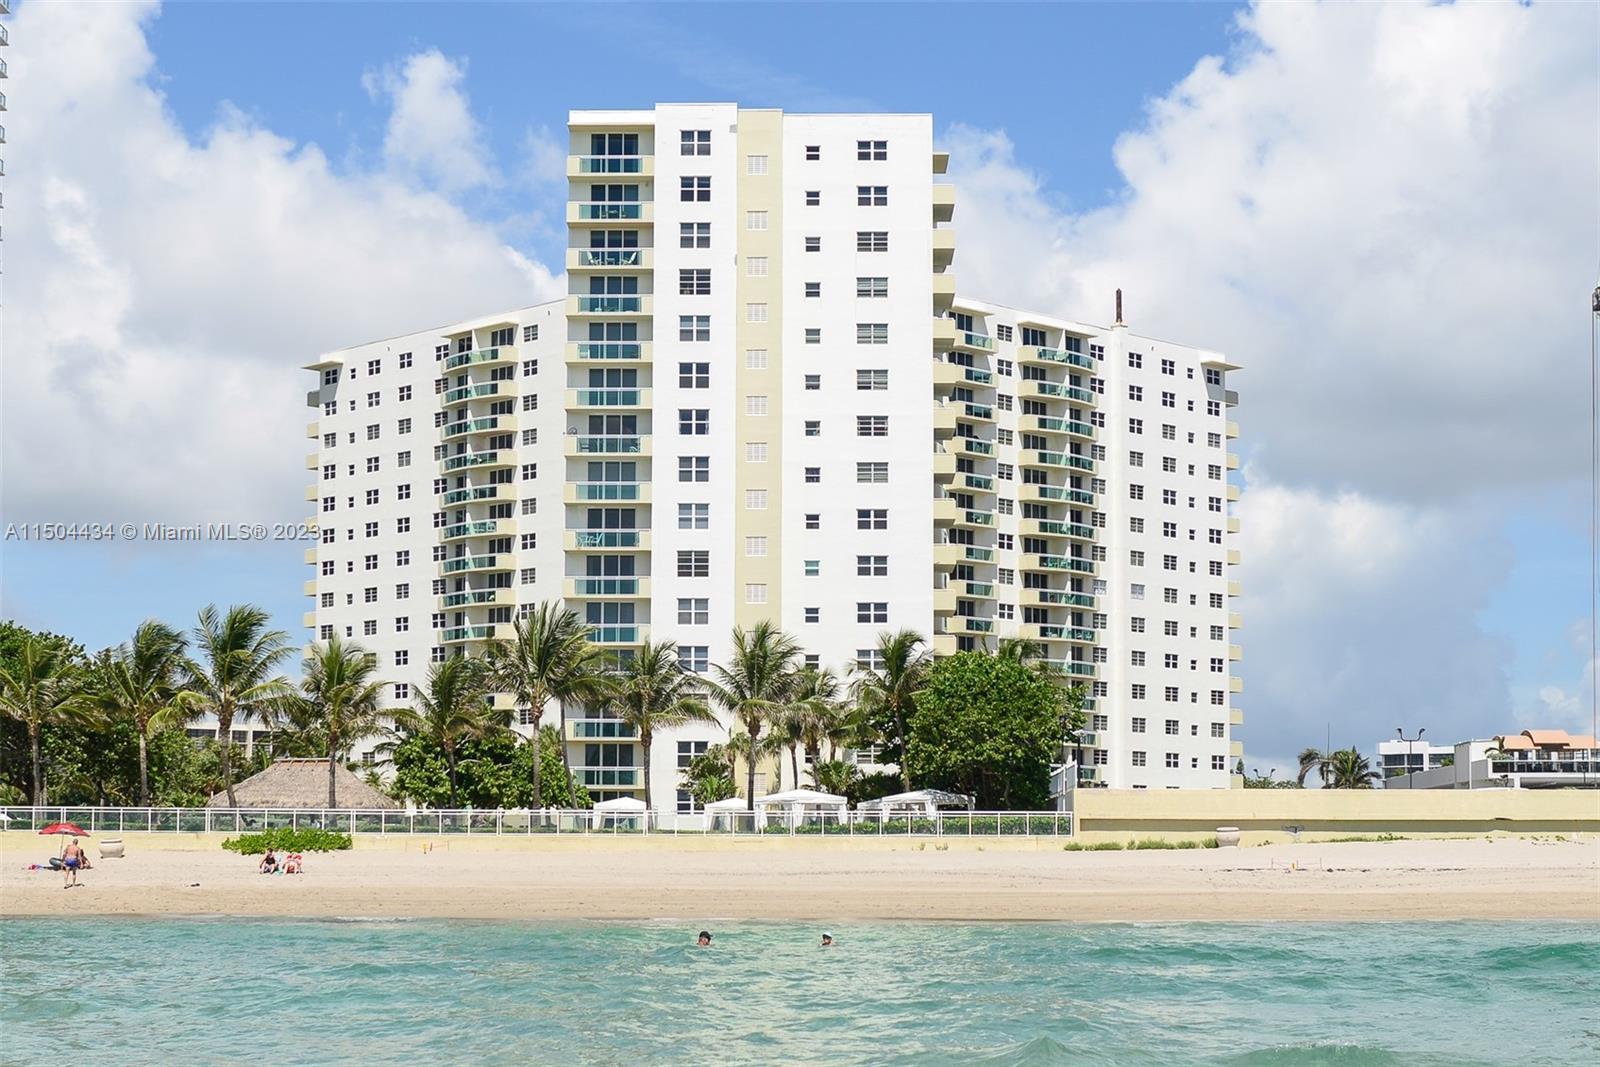 Photo of 3001 S Ocean Dr #1639 in Hollywood, FL